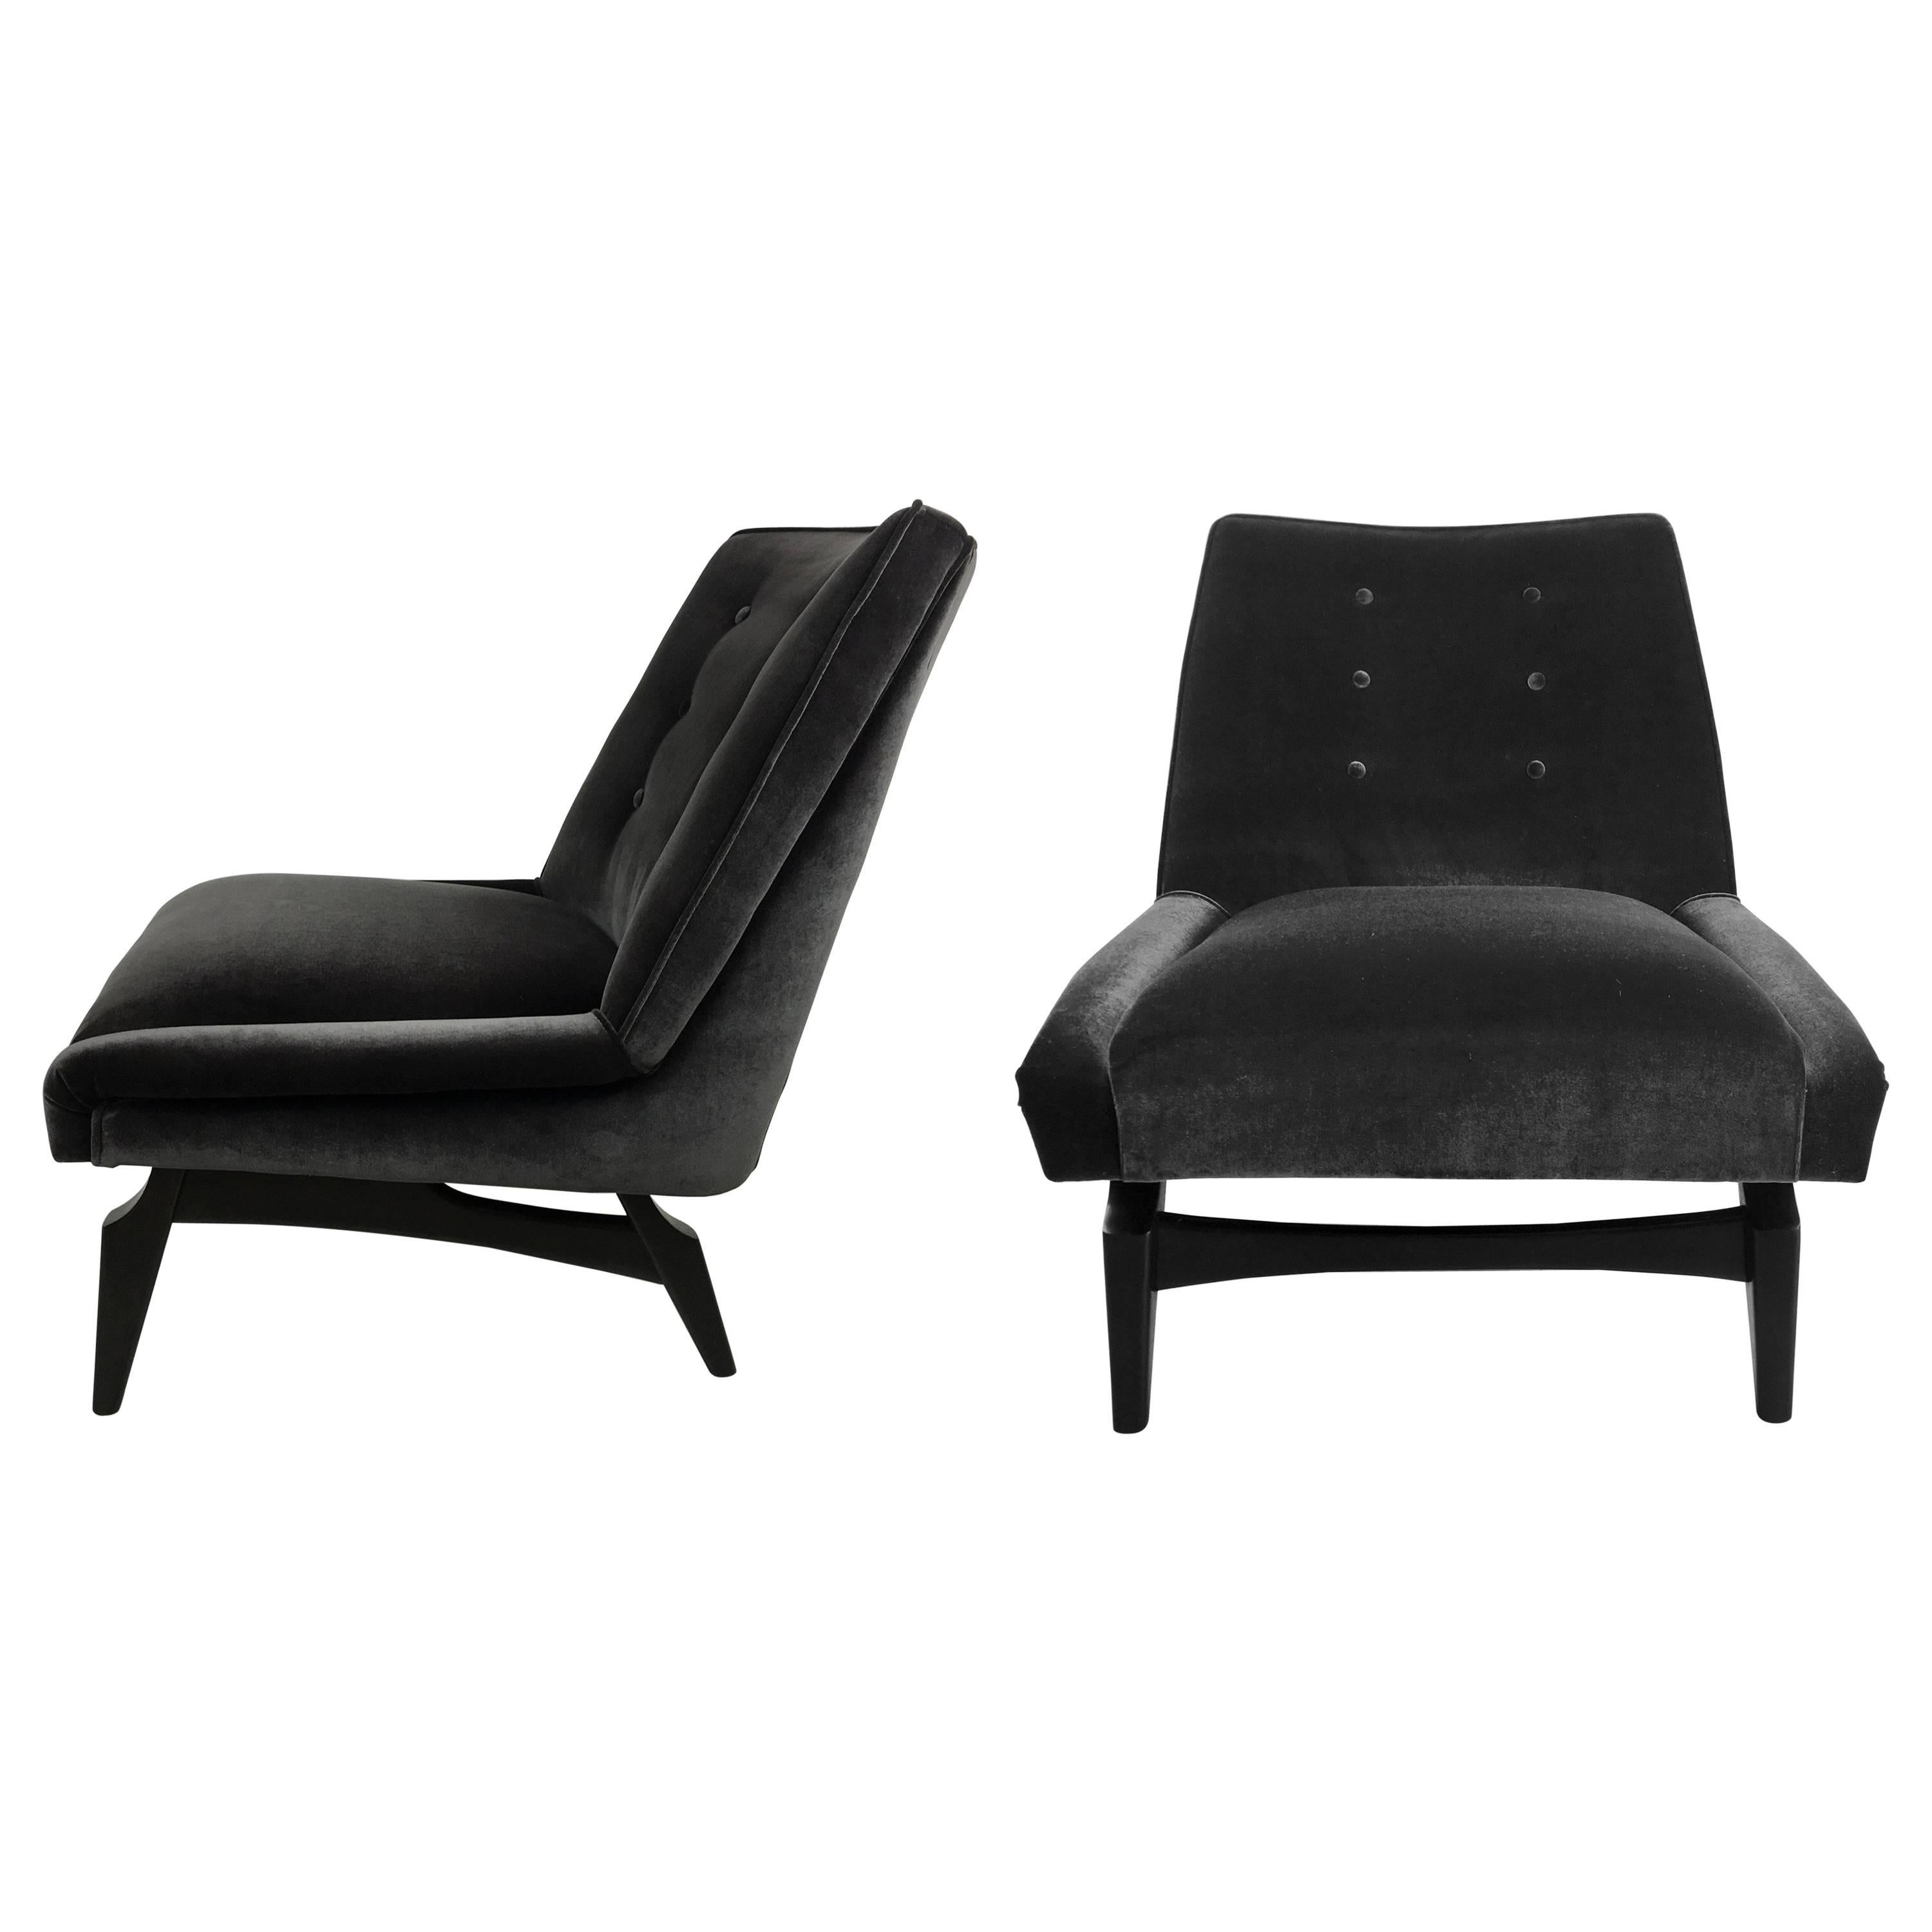 Pair of Italian Modern Style Lounge Chairs